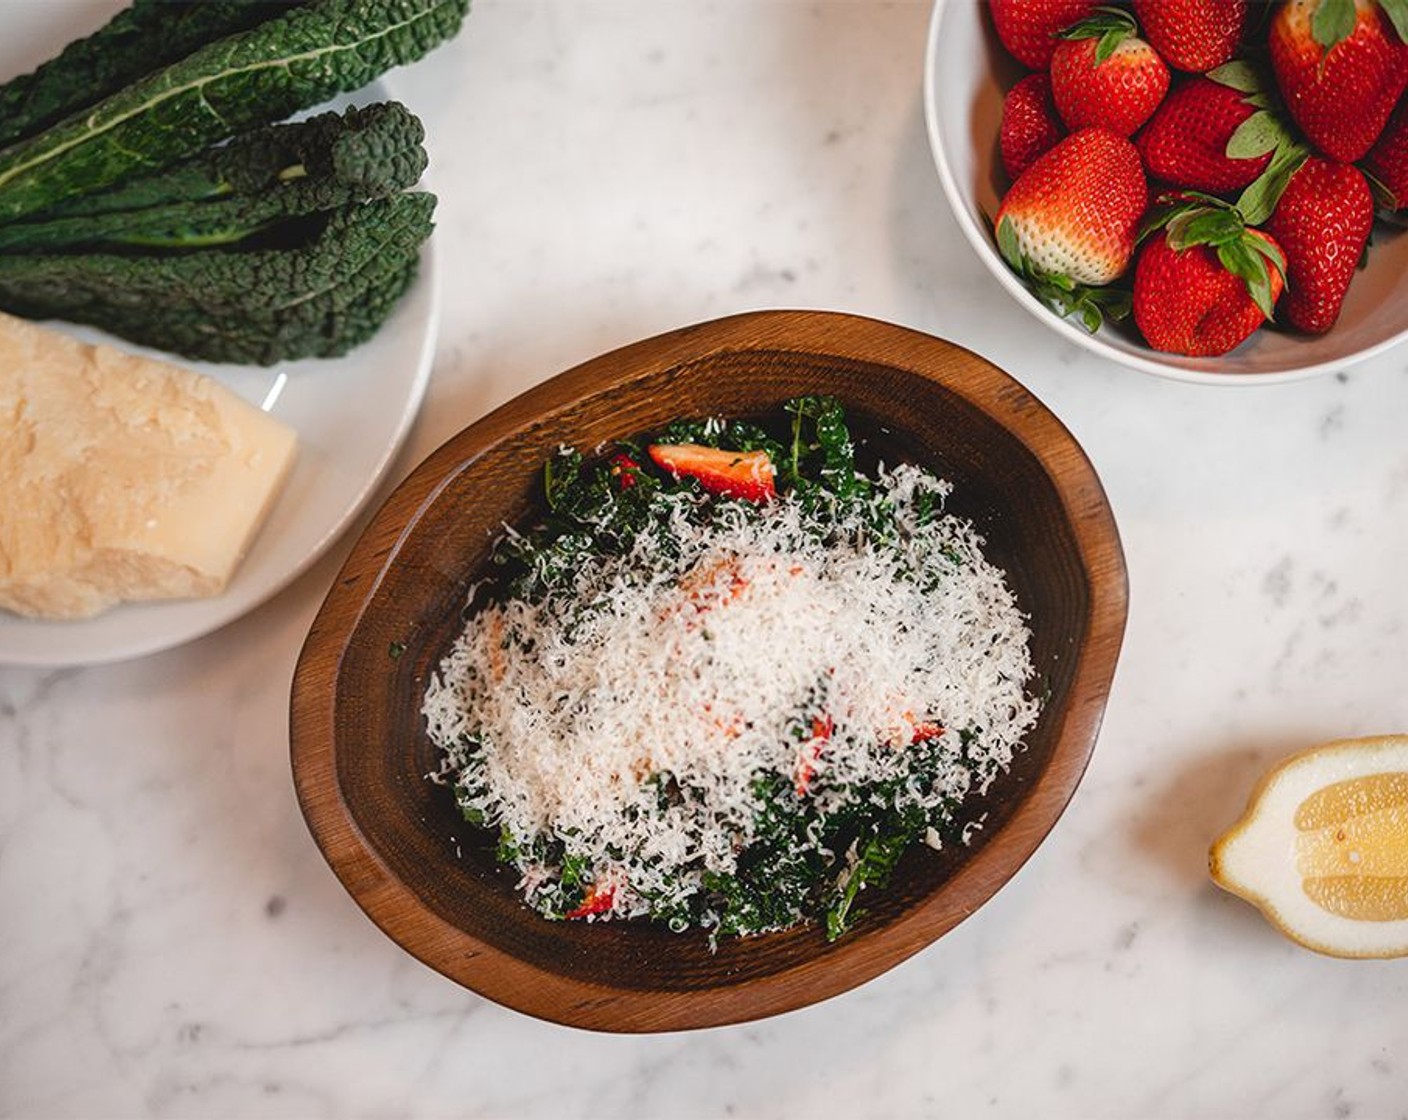 Kale and Strawberry Salad with Parmesan